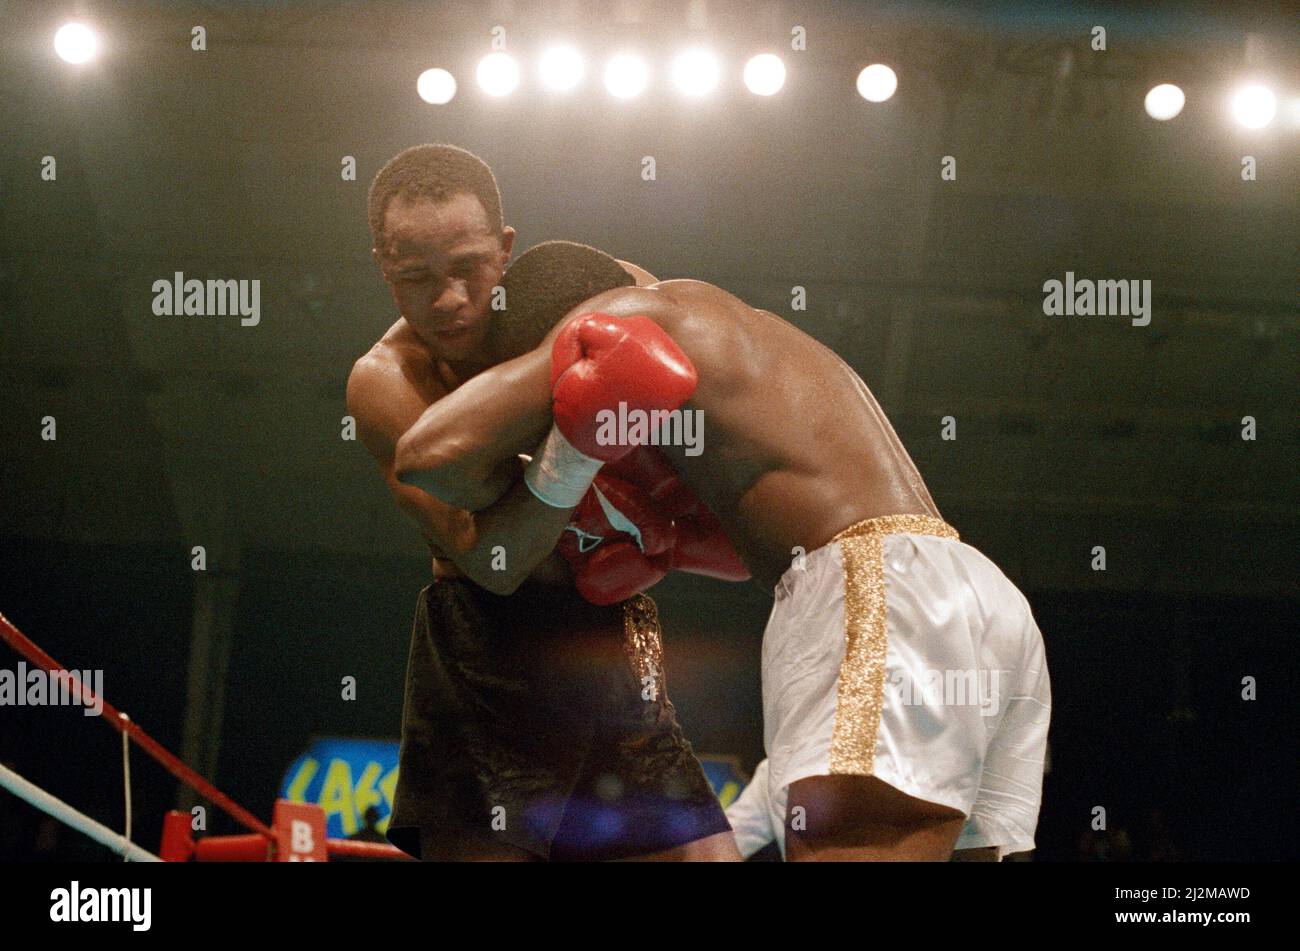 Lloyd Honeyghan vs Marlon Starling for the WBC Welterweight title. Caesars Palace, Las Vegas, Nevada, USA. Starling won by TKO in round nine to become new WBC welterweight champion.(Picture) Fight action. 4th February 1989. Stock Photo